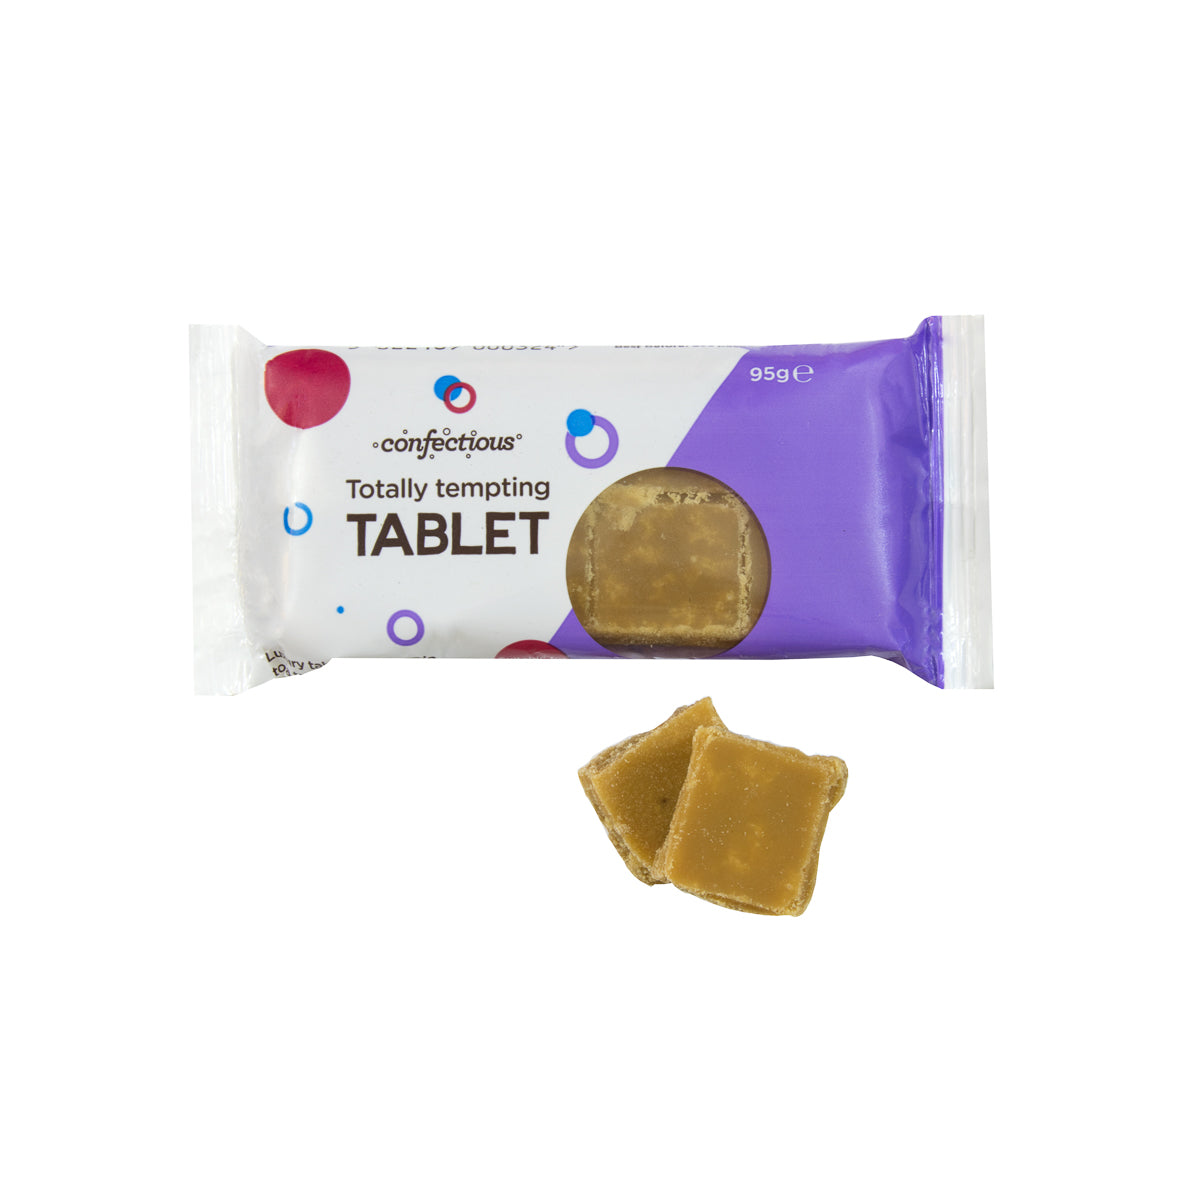 Scottish Totally Tempting Tablet 95g Bar Confectious